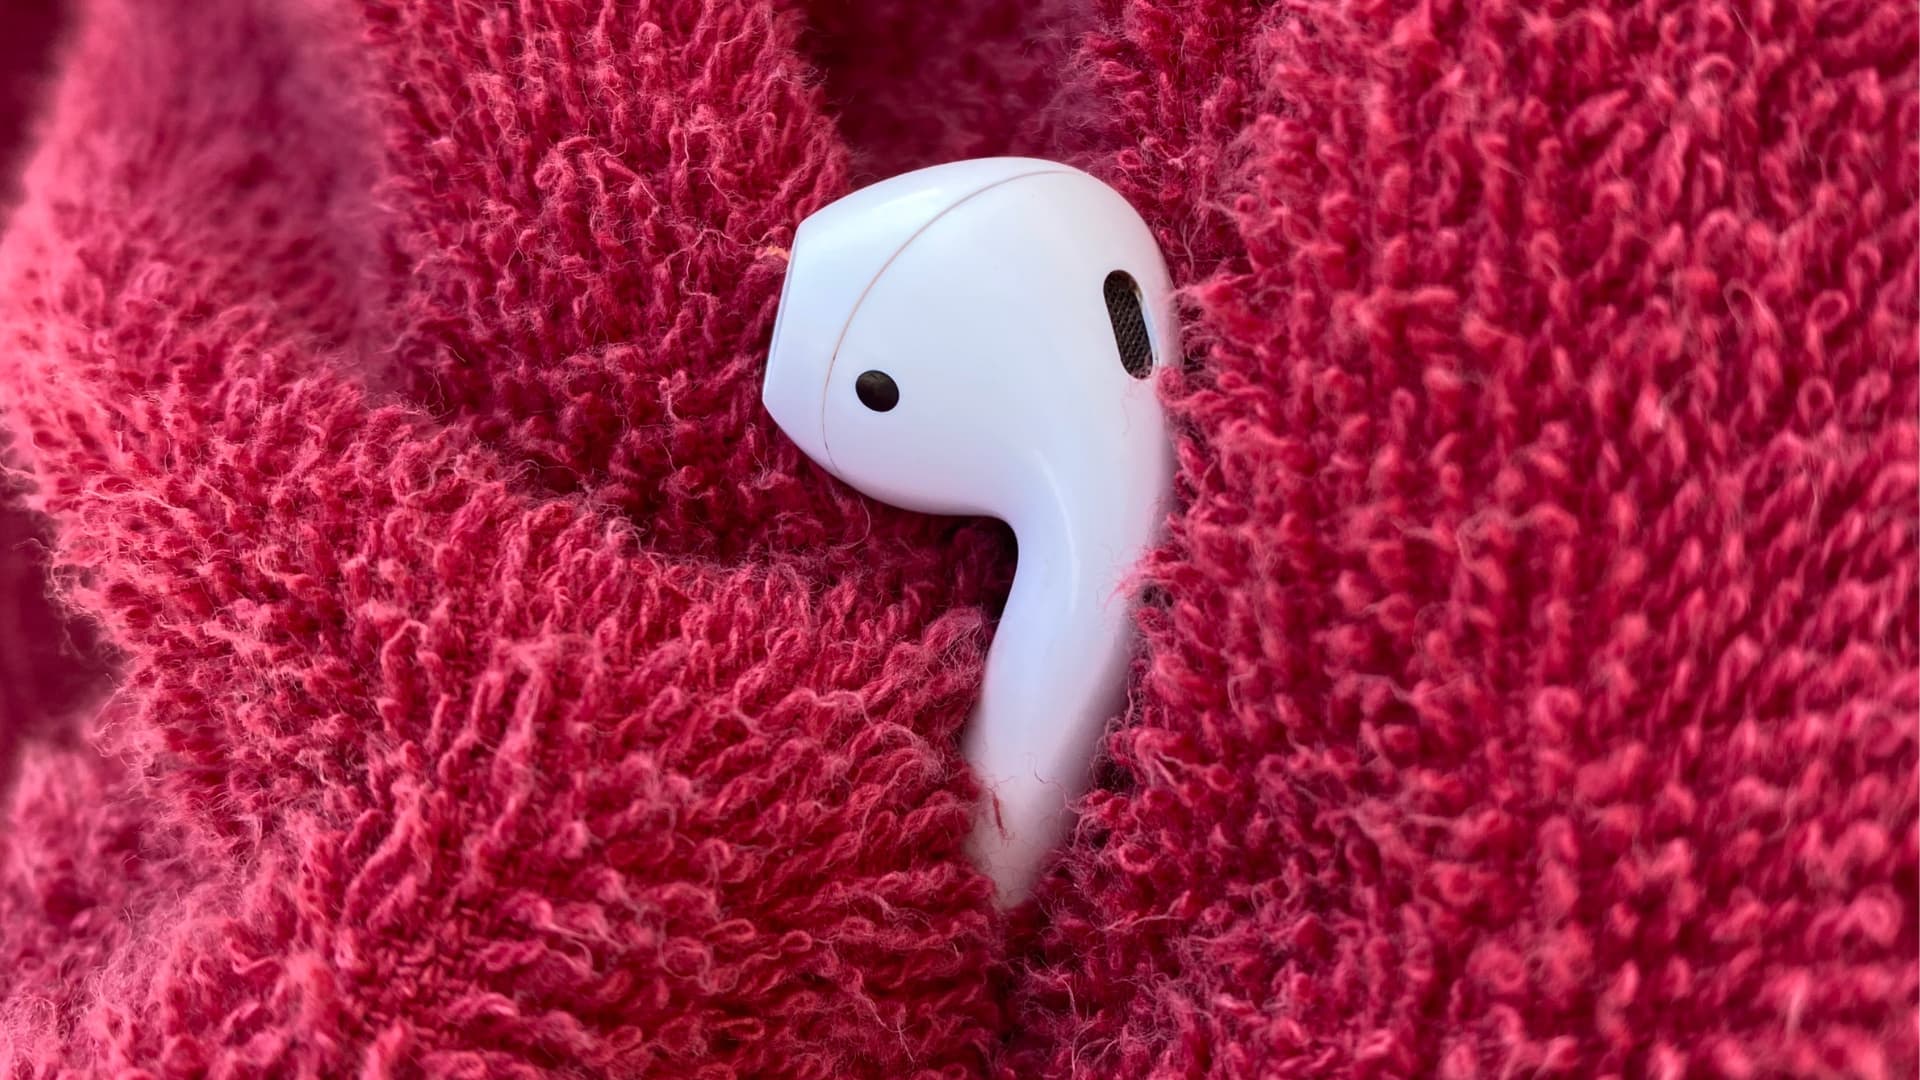 Wiping wet AirPods with a towel to get rid of water